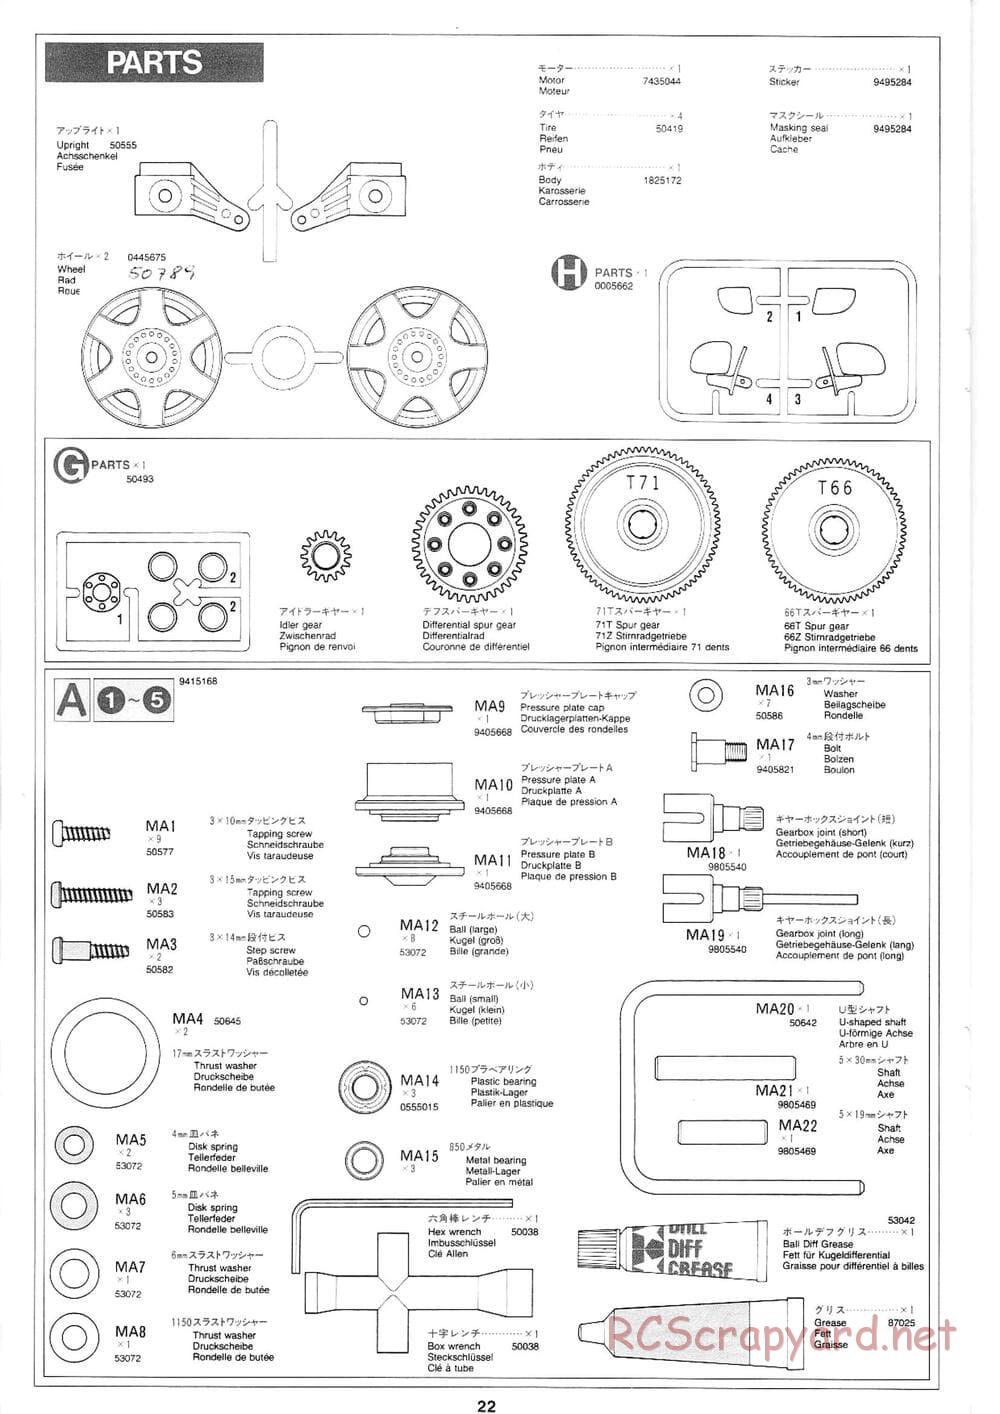 Tamiya - Volkswagen New Beetle - FF-01 Chassis - Manual - Page 18